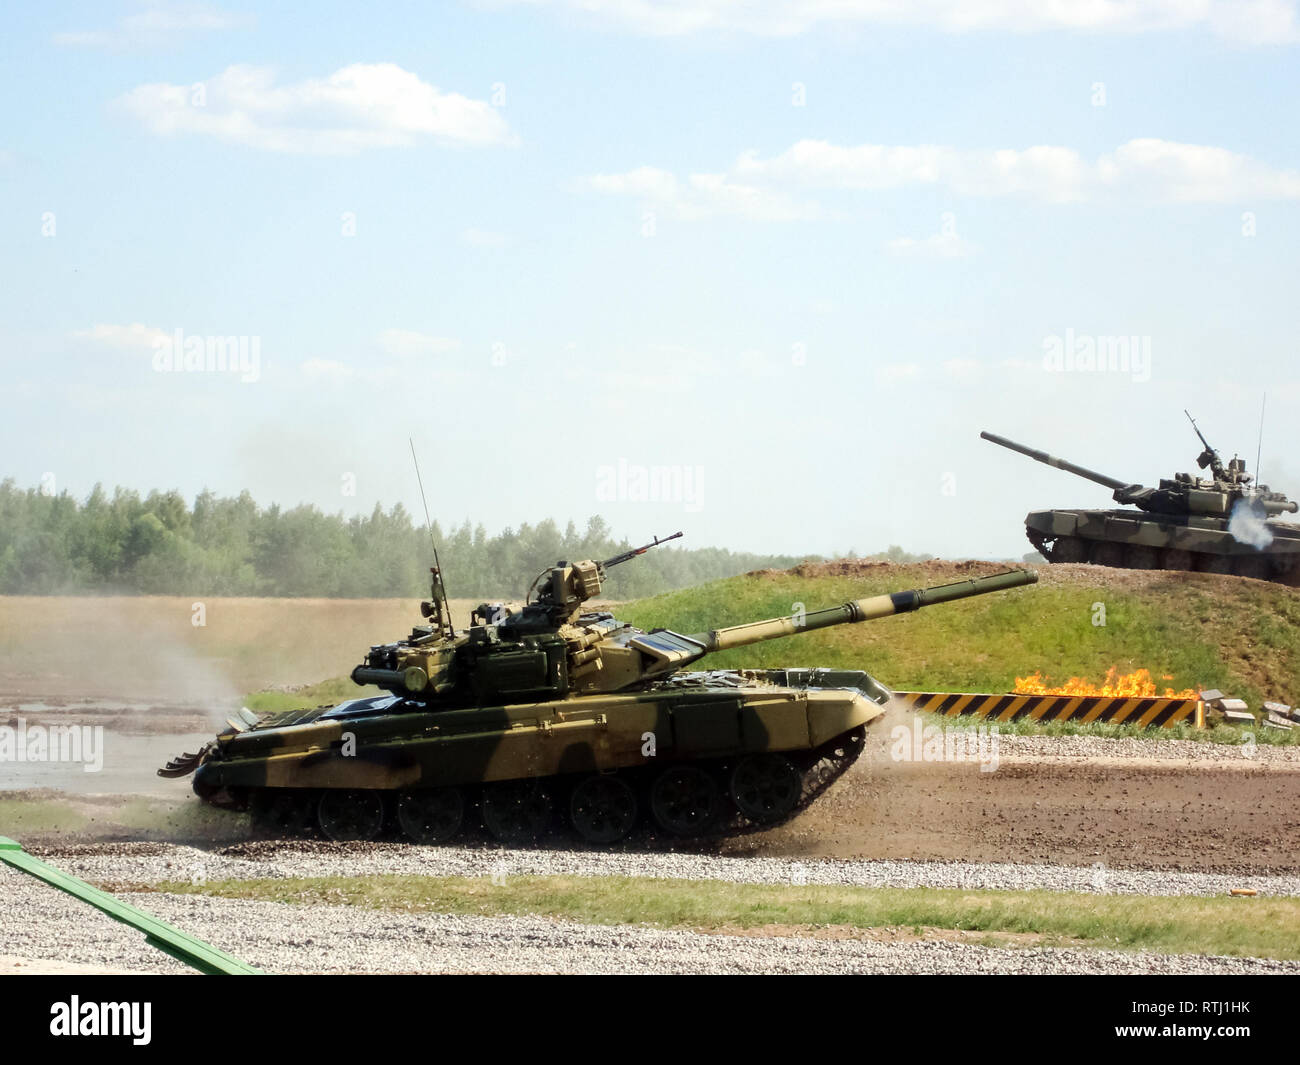 Kubinka, Russia - June 12, 2011: Museum of armored vehicles under the open sky and under sheds in Kubinka near Moscow. Stock Photo